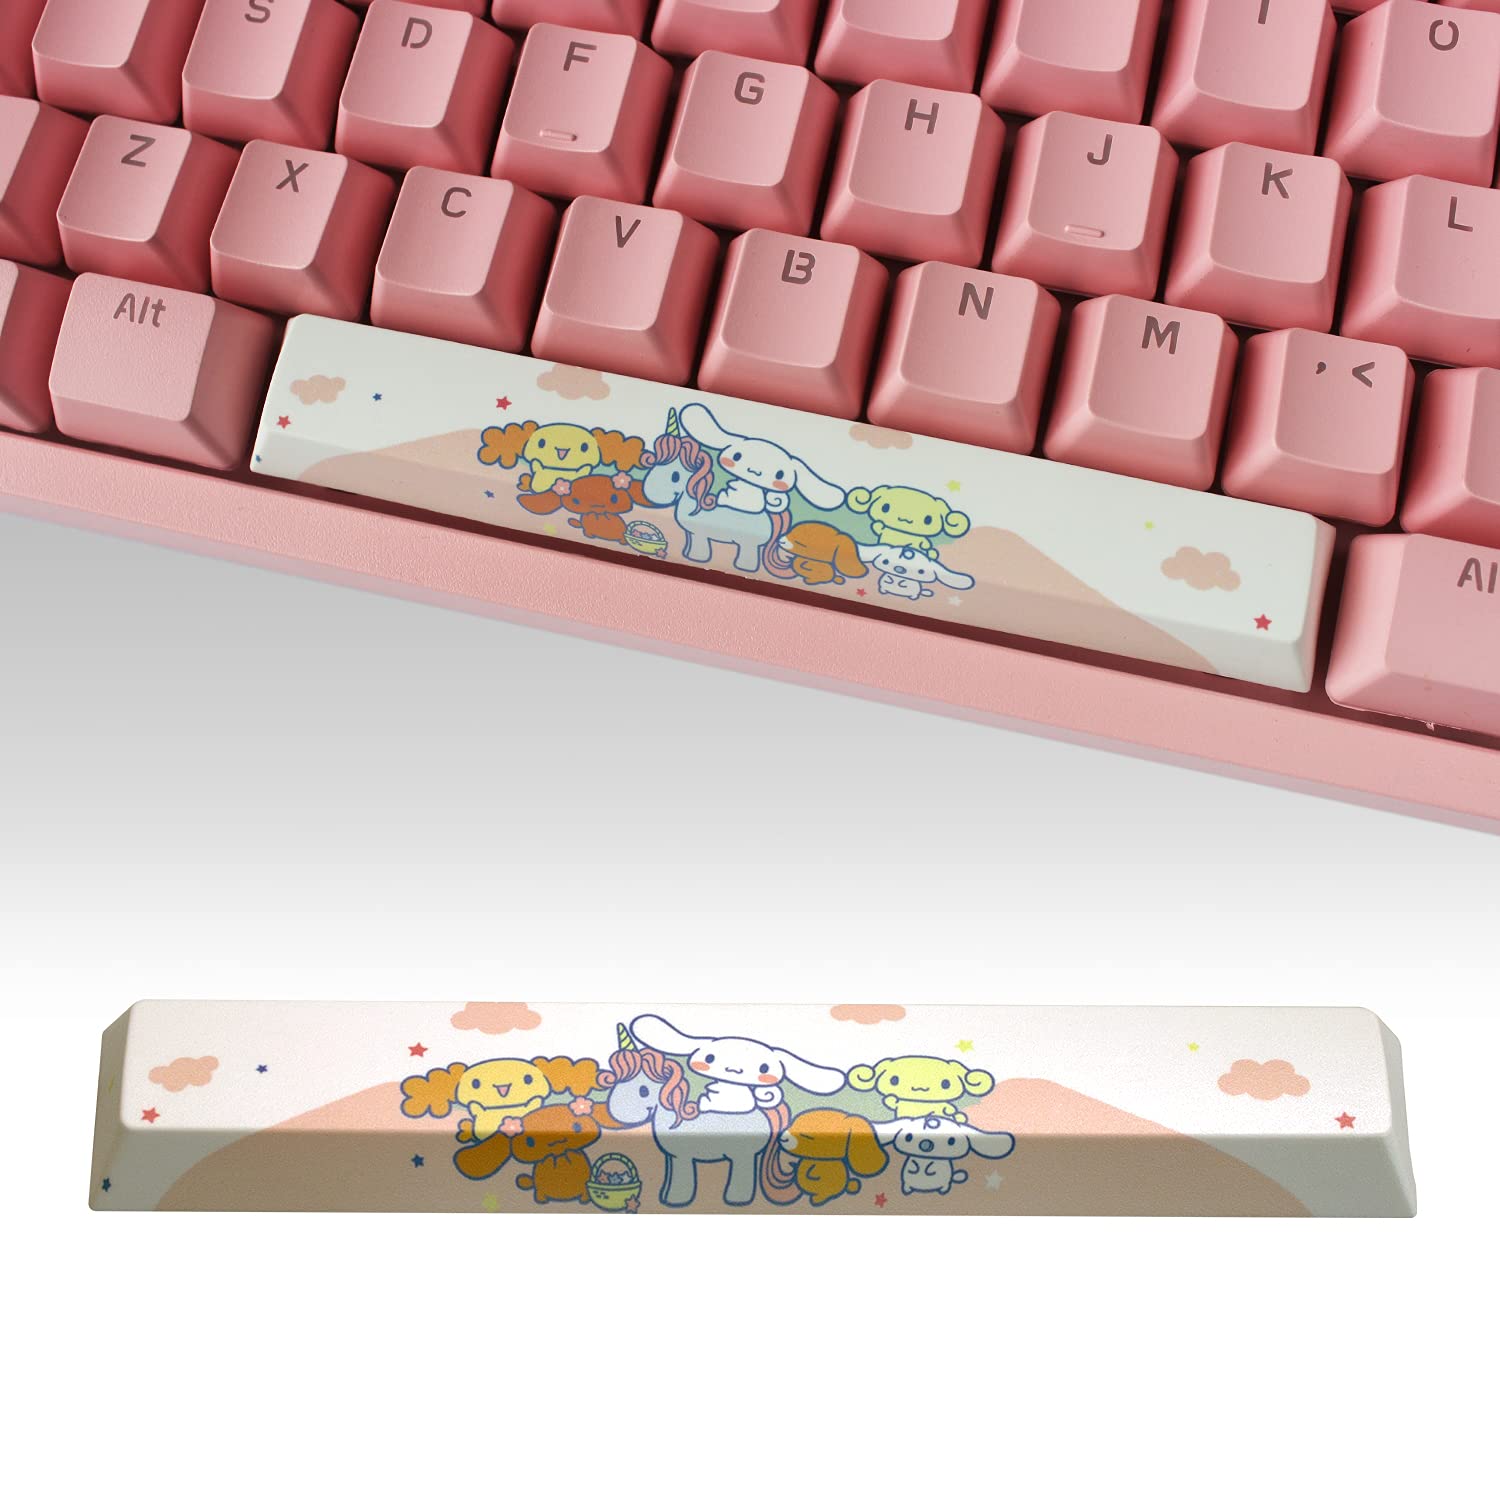 9 Incredible Space Bar Keycap for 2024